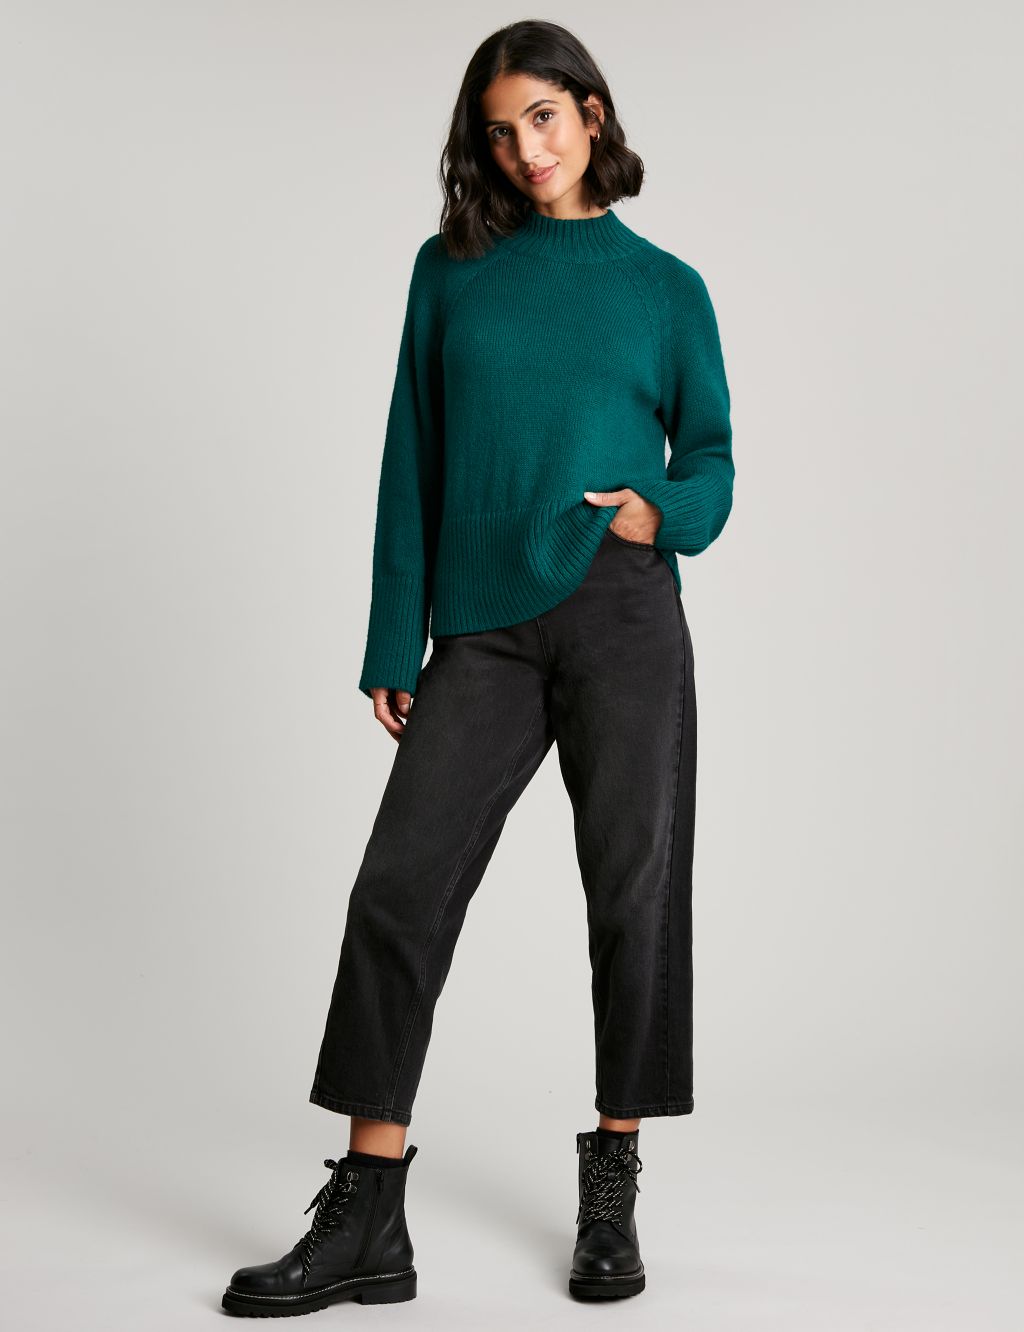 Ribbed Roll Neck Jumper with Wool image 1